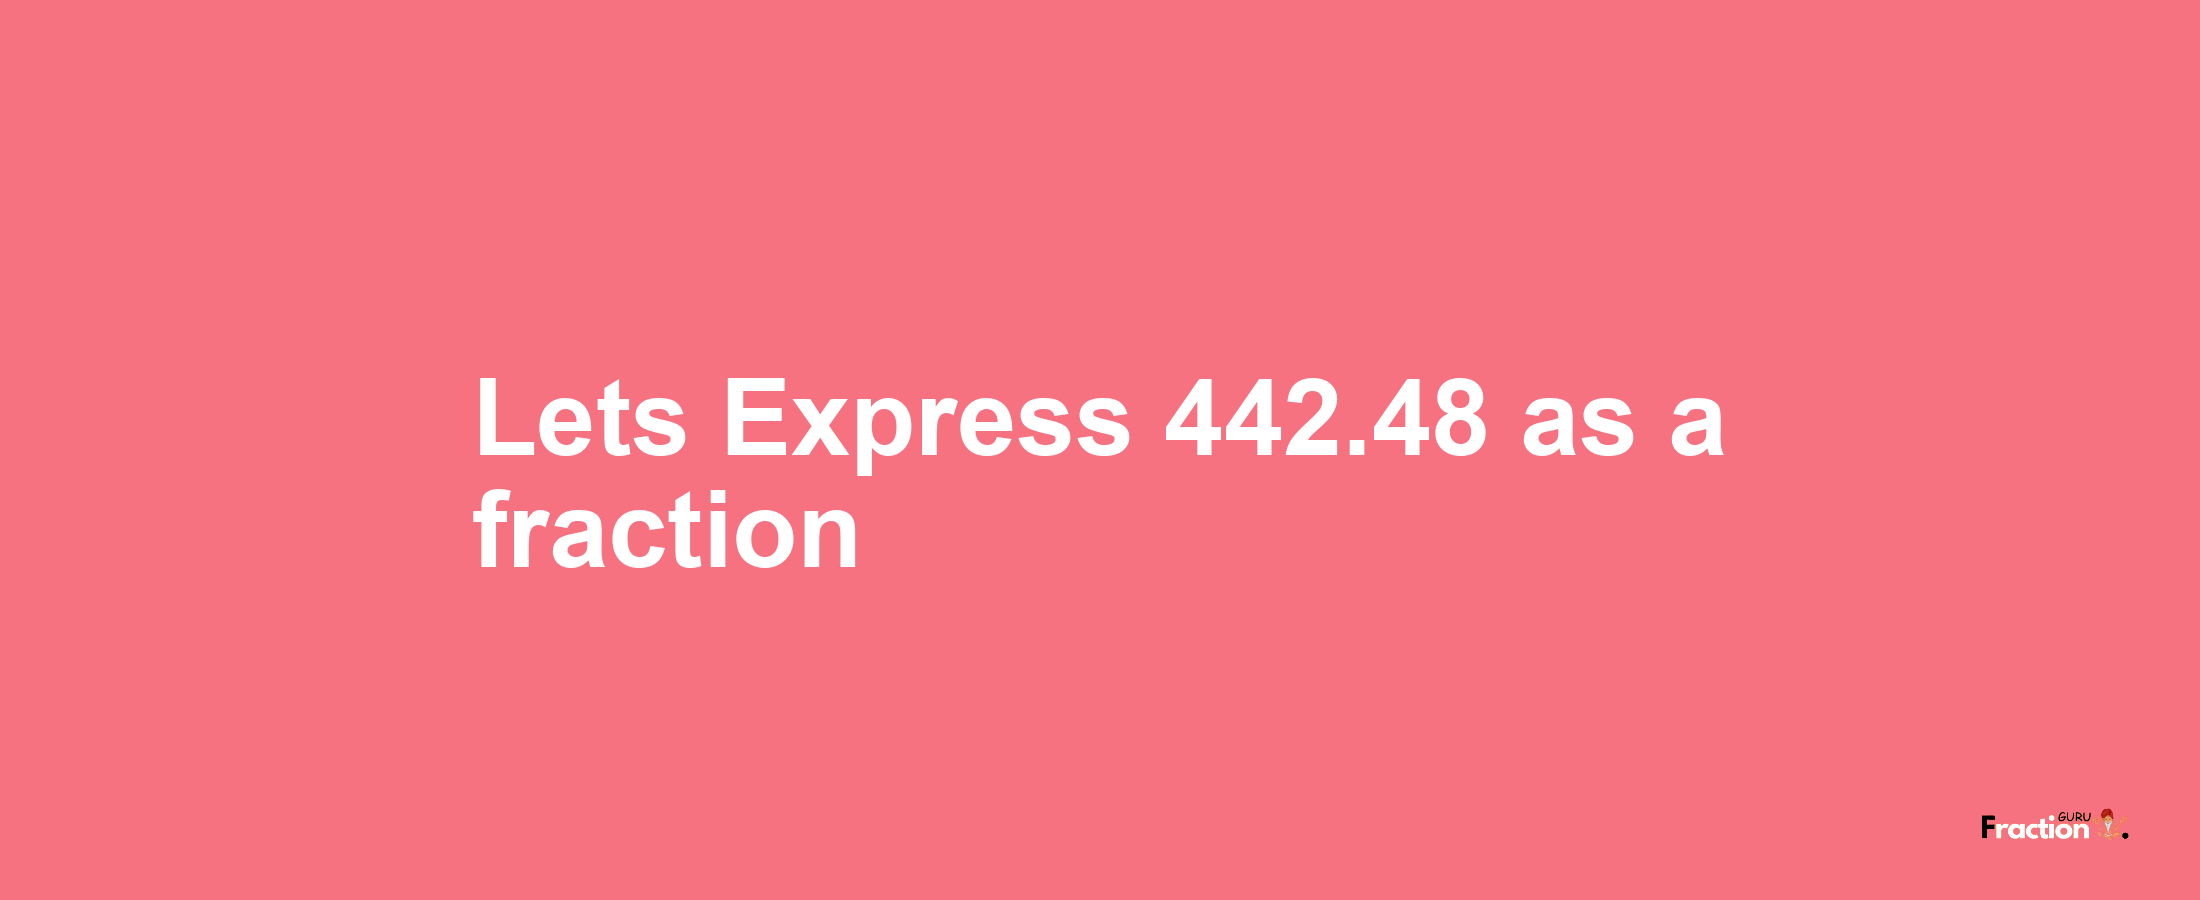 Lets Express 442.48 as afraction